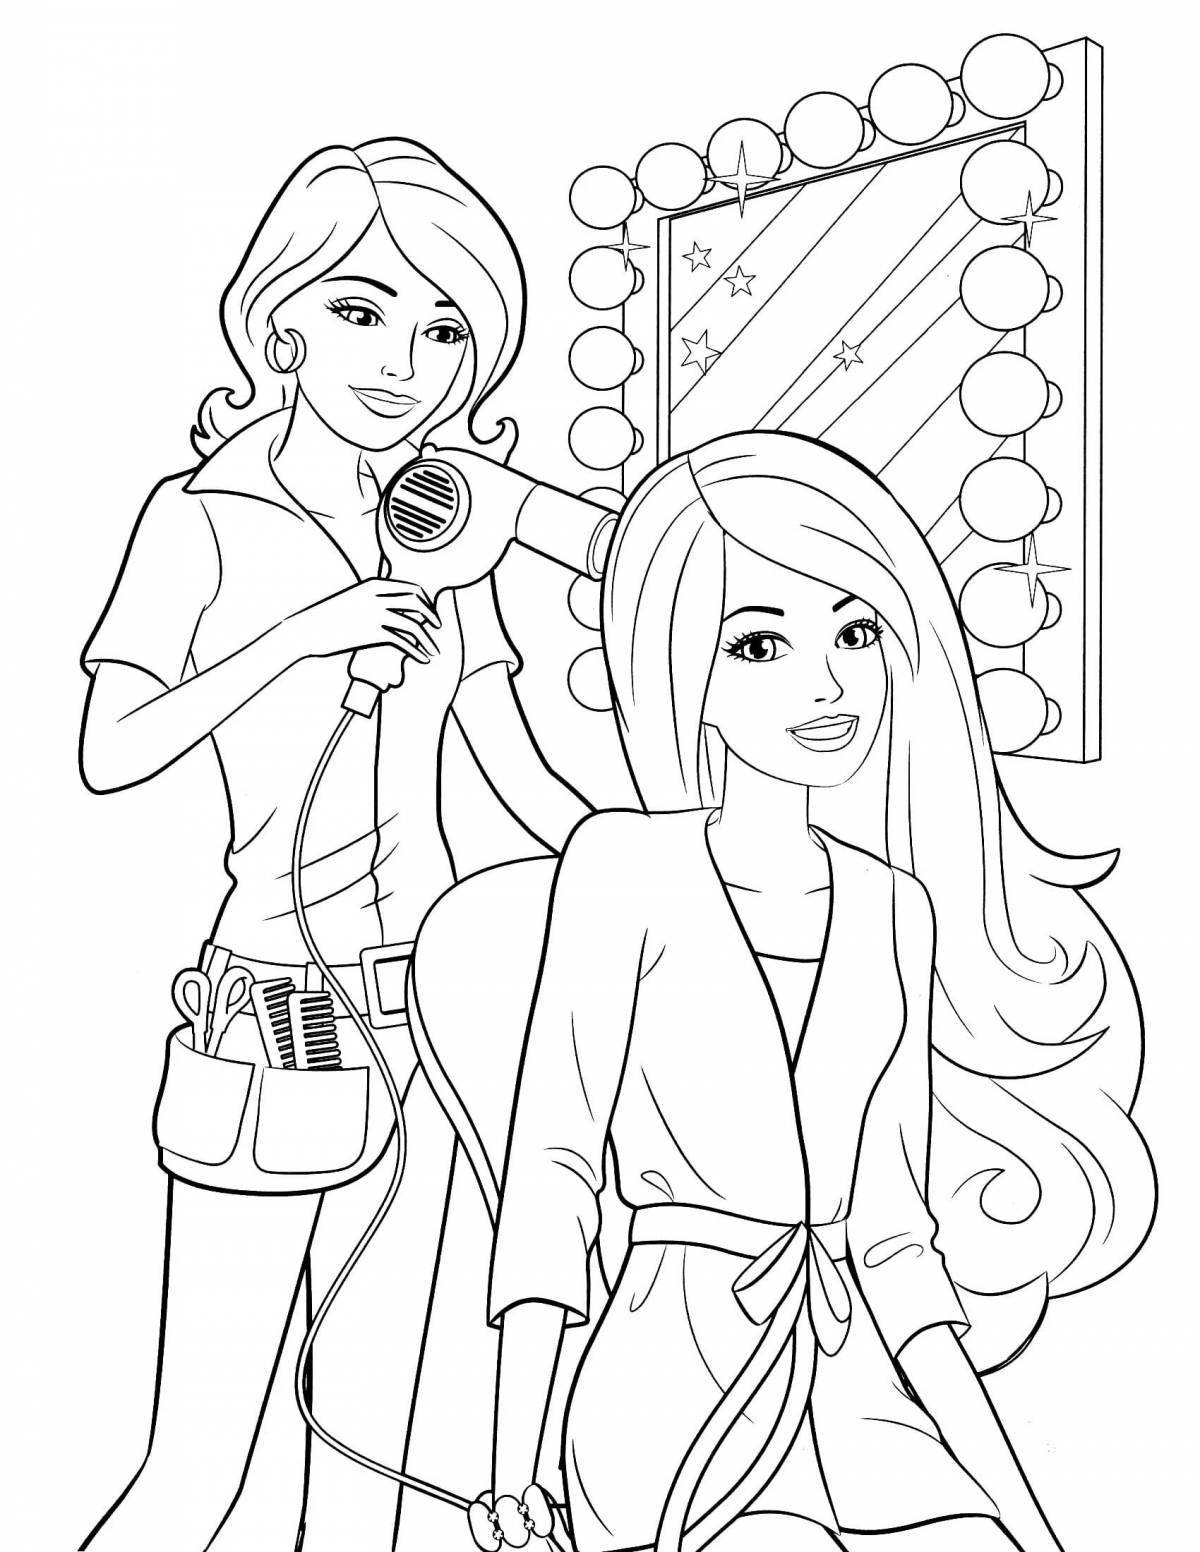 Barbie live coloring page